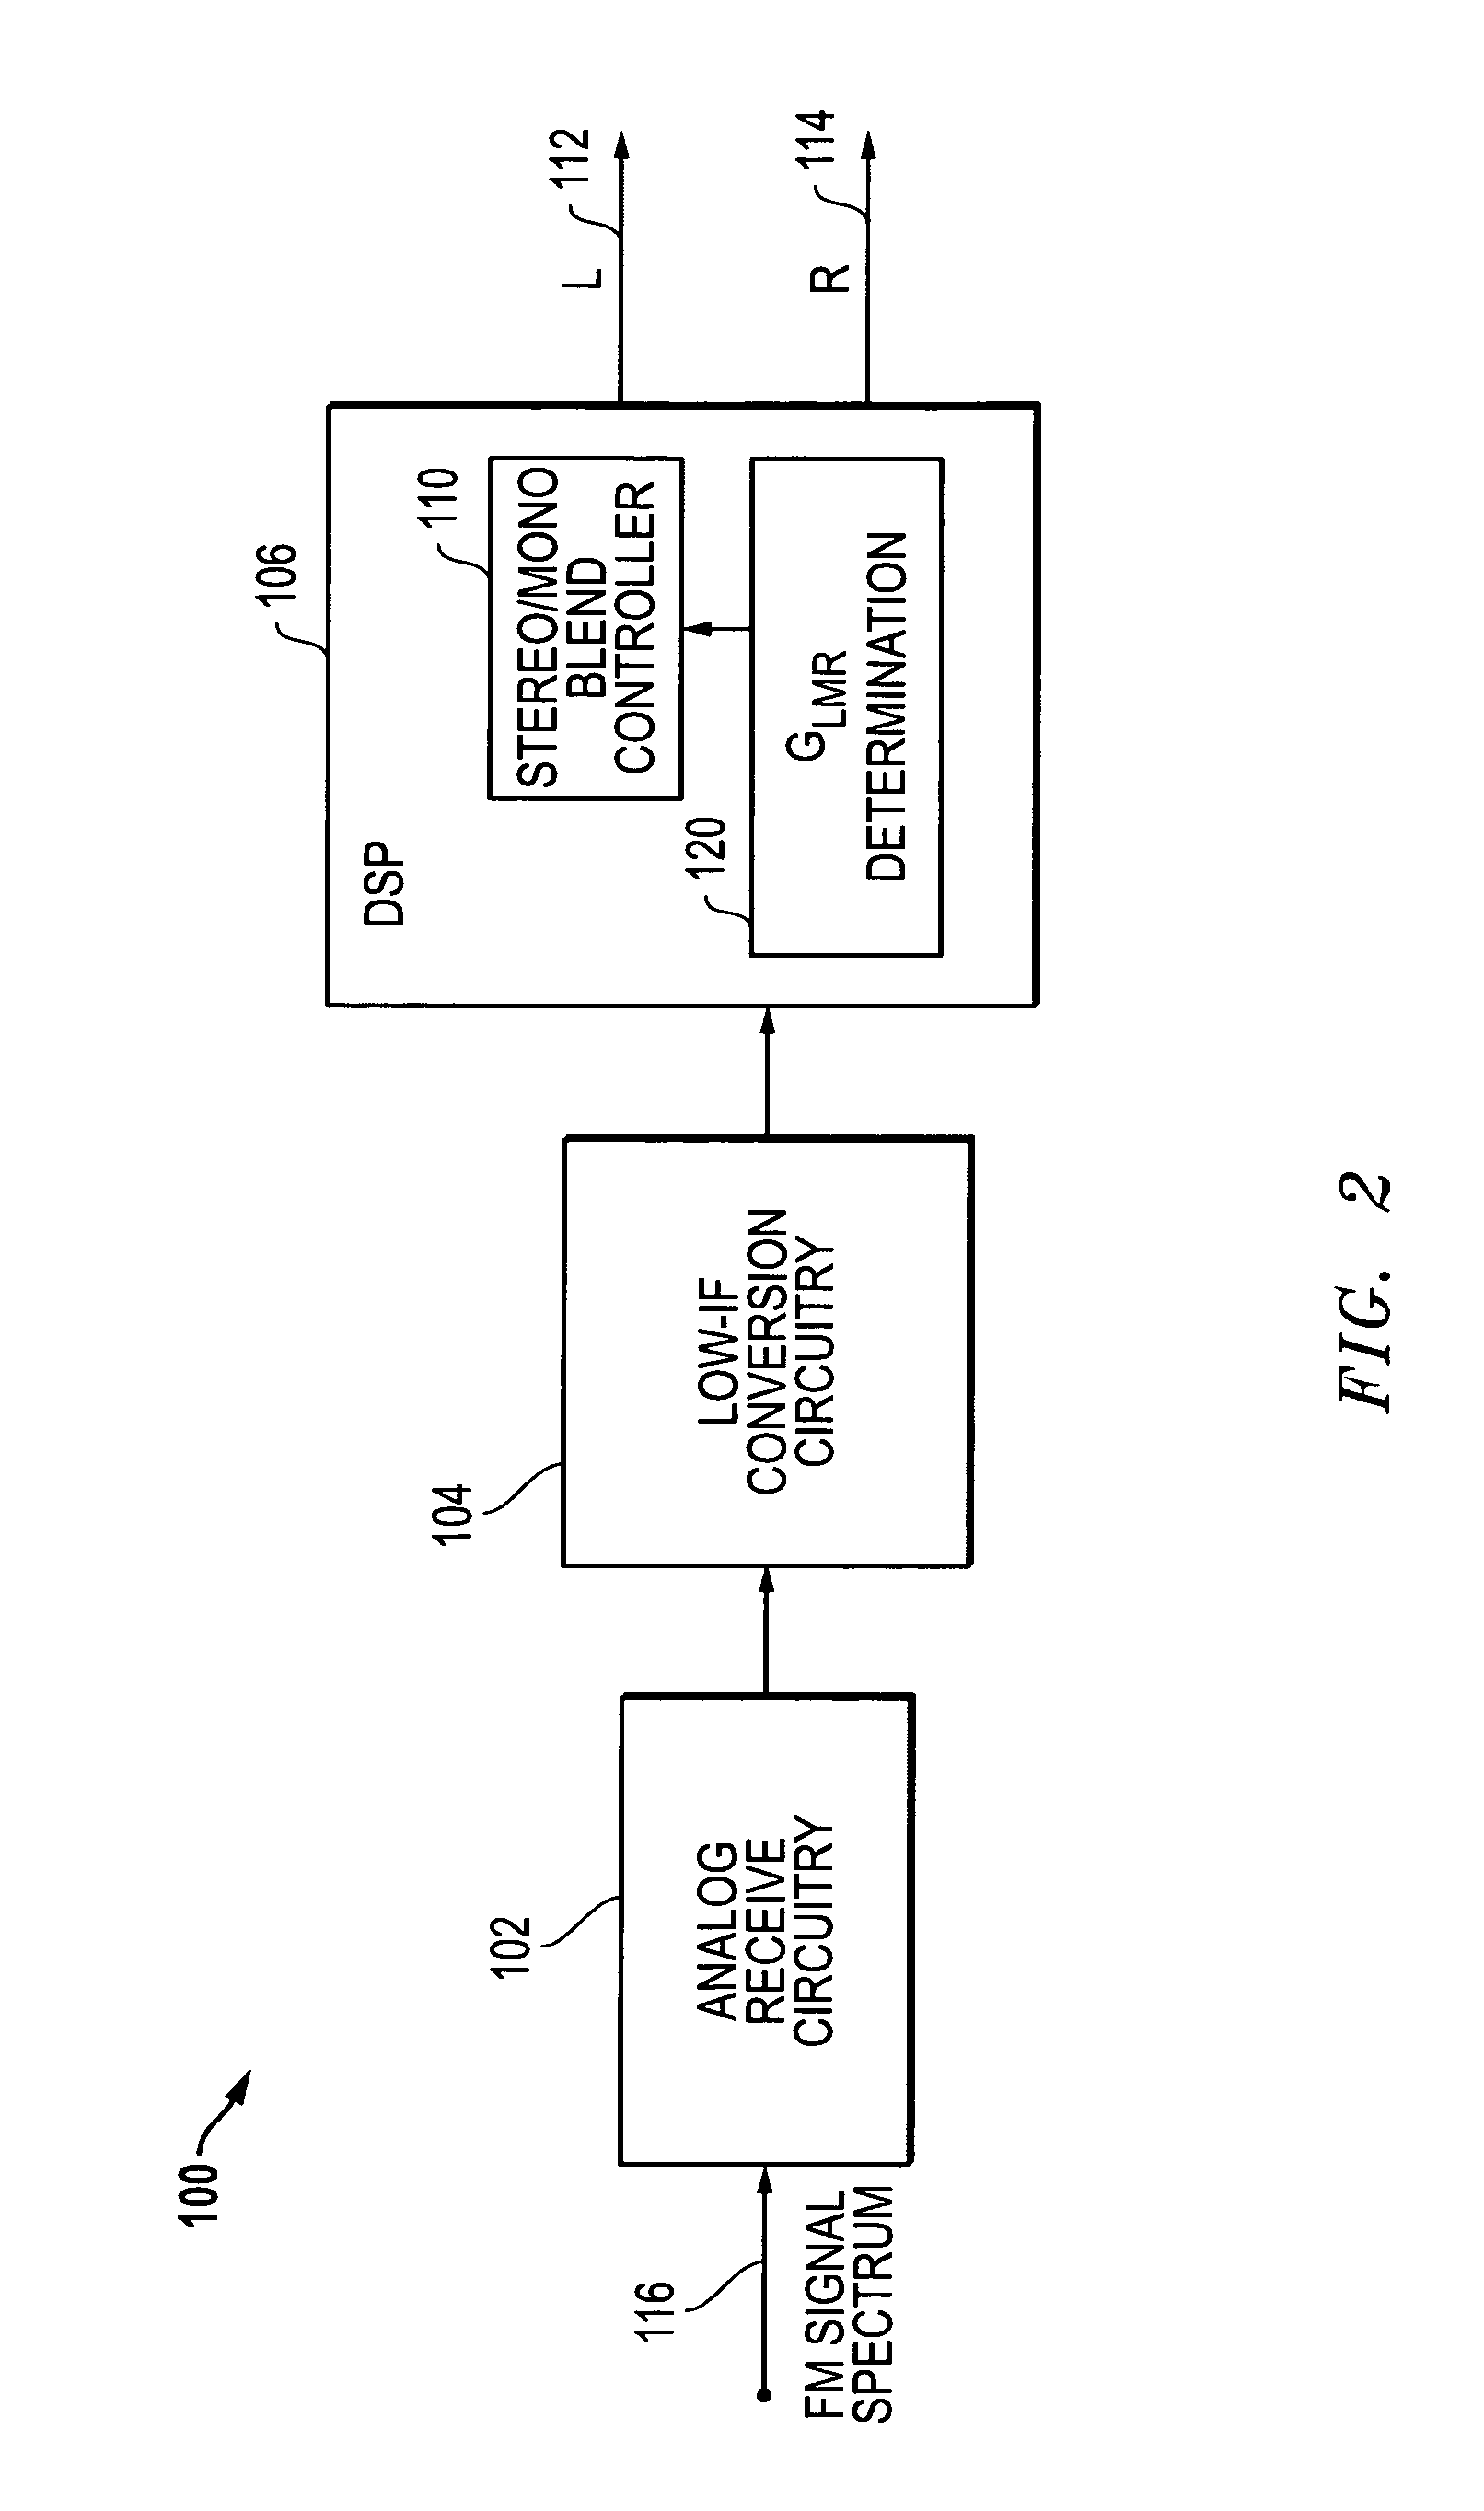 Methods and systems for blending between stereo and mono in a FM receiver